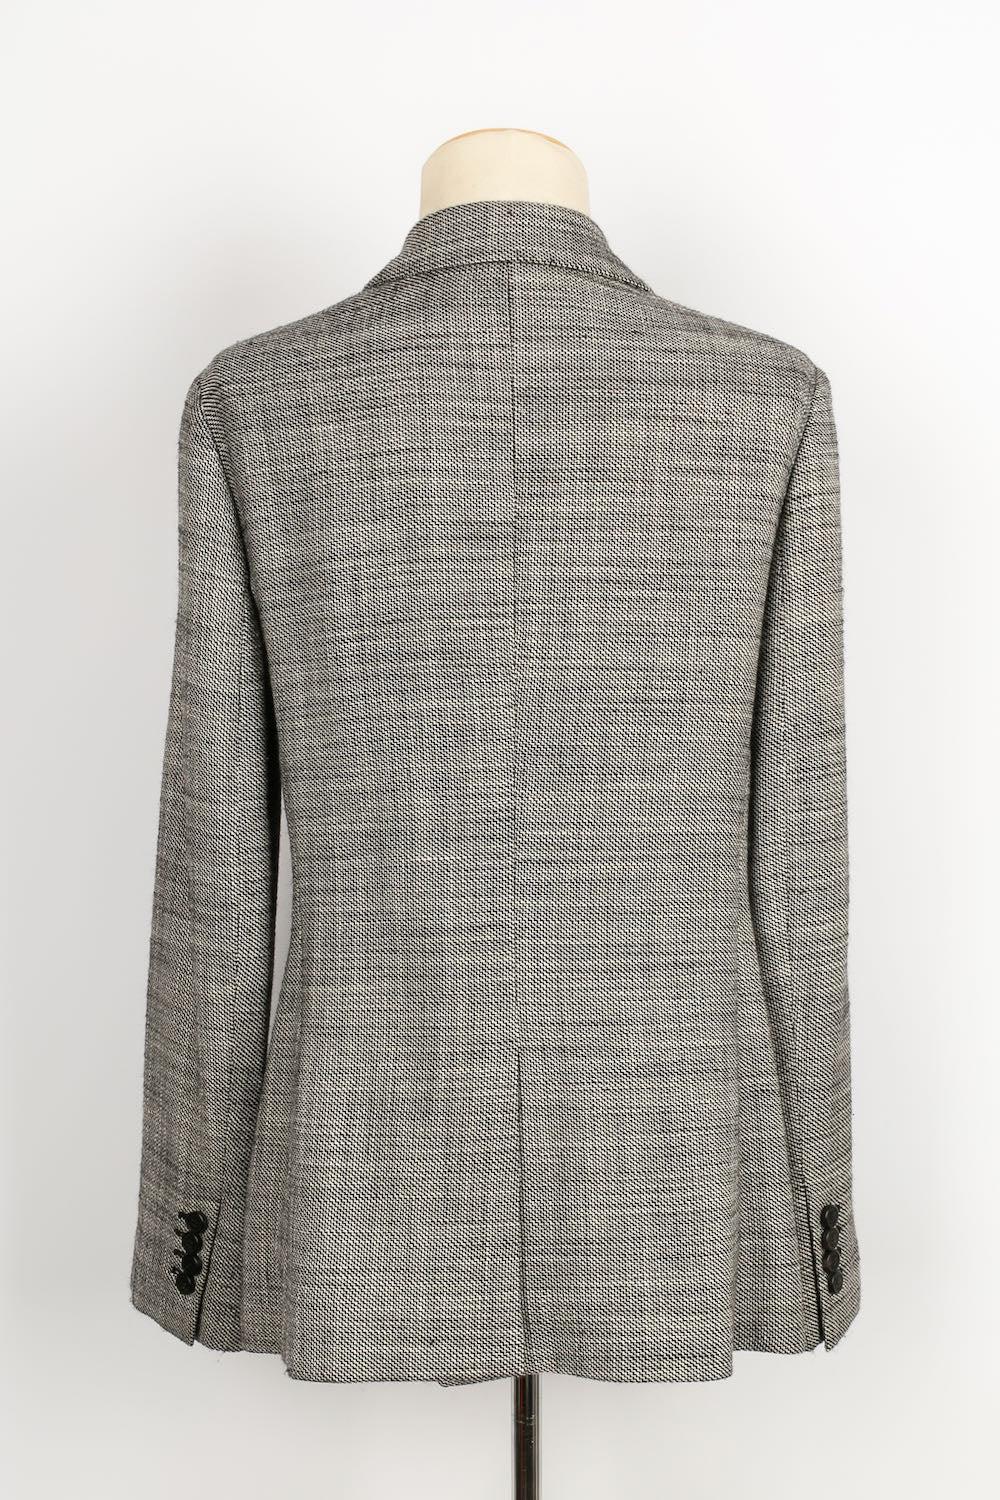 Christian Dior Grey Wool and Silk Jacket In Excellent Condition For Sale In SAINT-OUEN-SUR-SEINE, FR